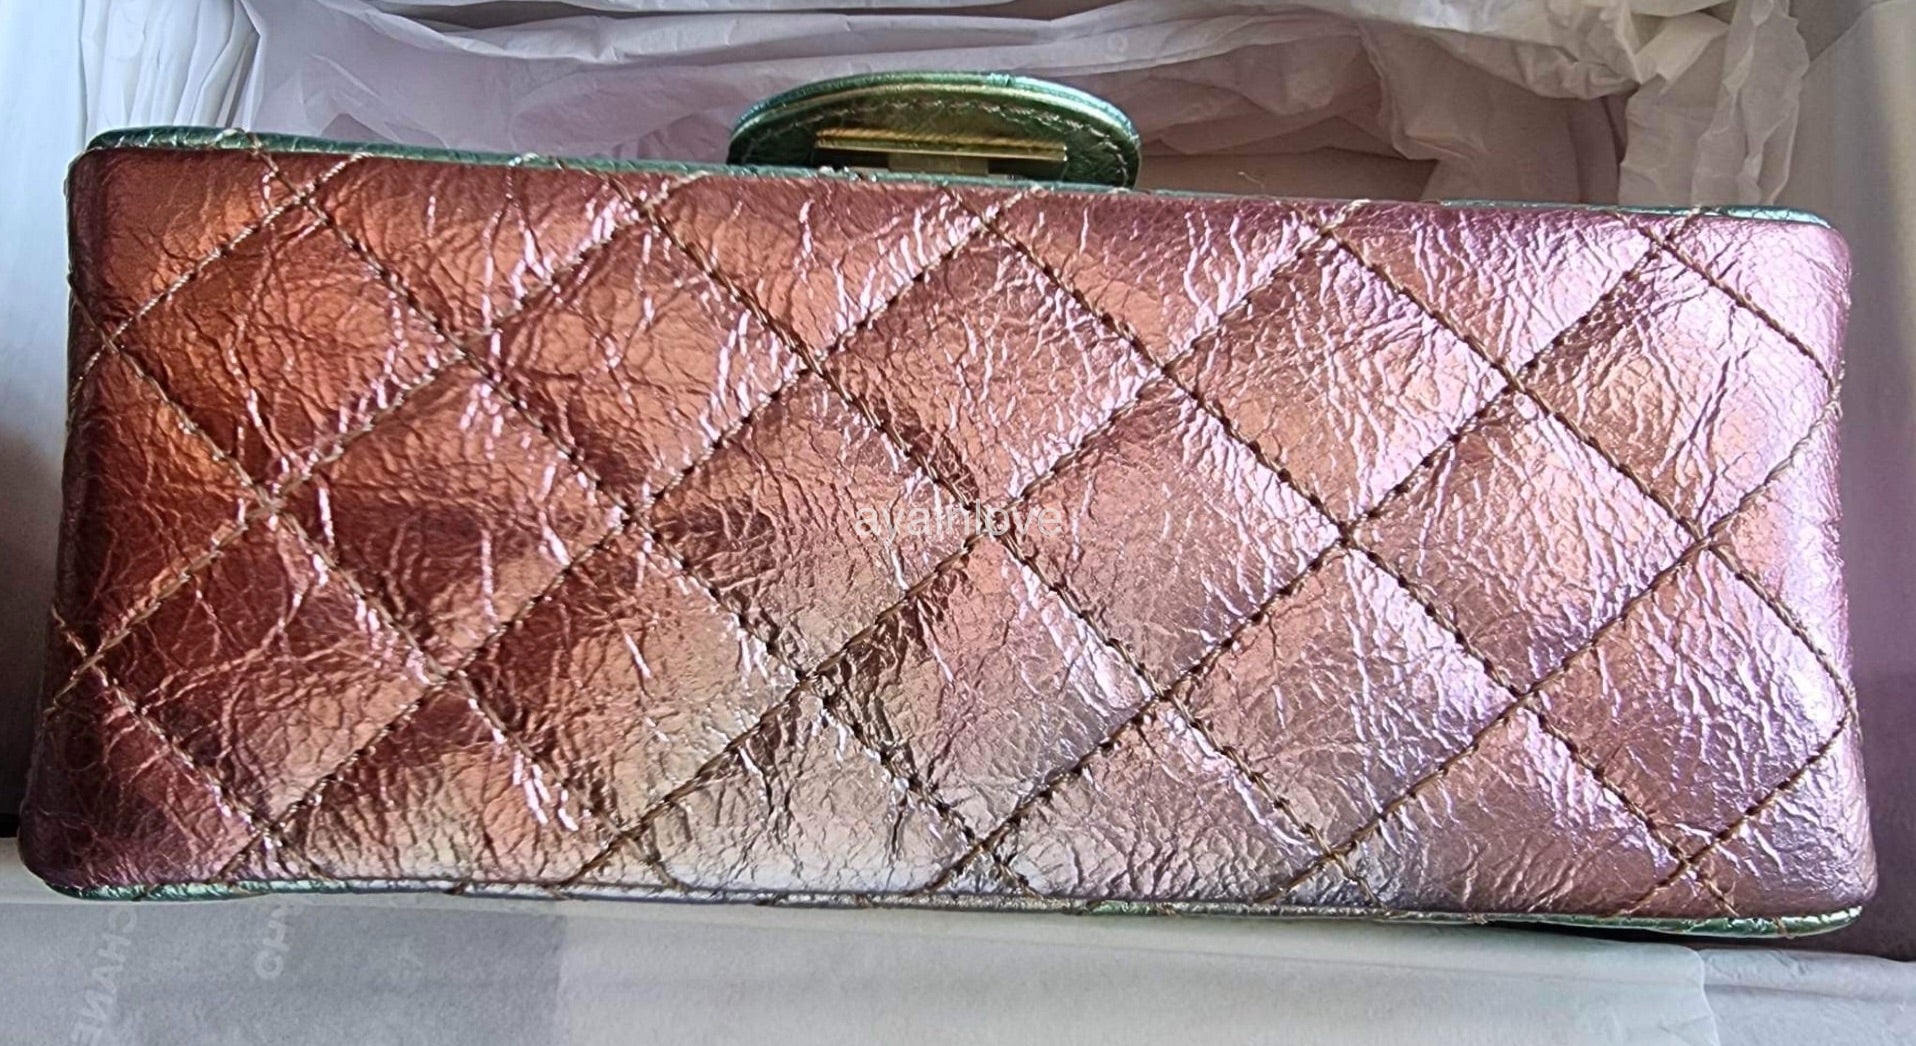 CHANEL 19A Gold Calf Skin Tweed Small Gabby Gabrielle Bag Mixed Hardwa –  AYAINLOVE CURATED LUXURIES